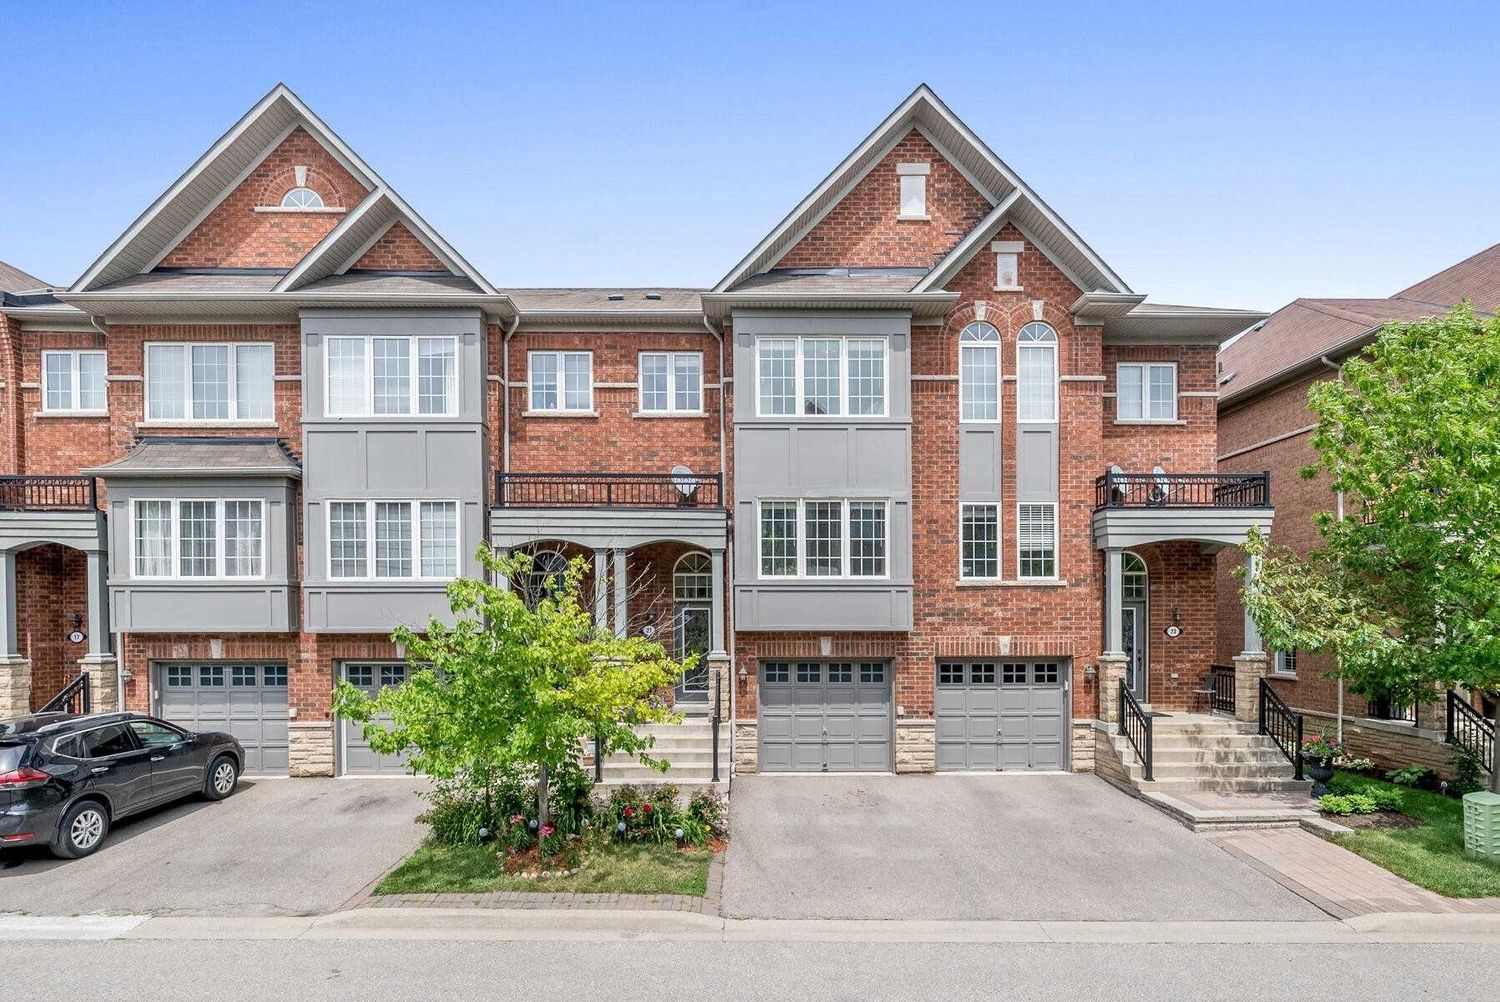 230 Paisley Boulevard W. 230 Paisley Boulevard West Townhomes is located in  Mississauga, Toronto - image #1 of 2